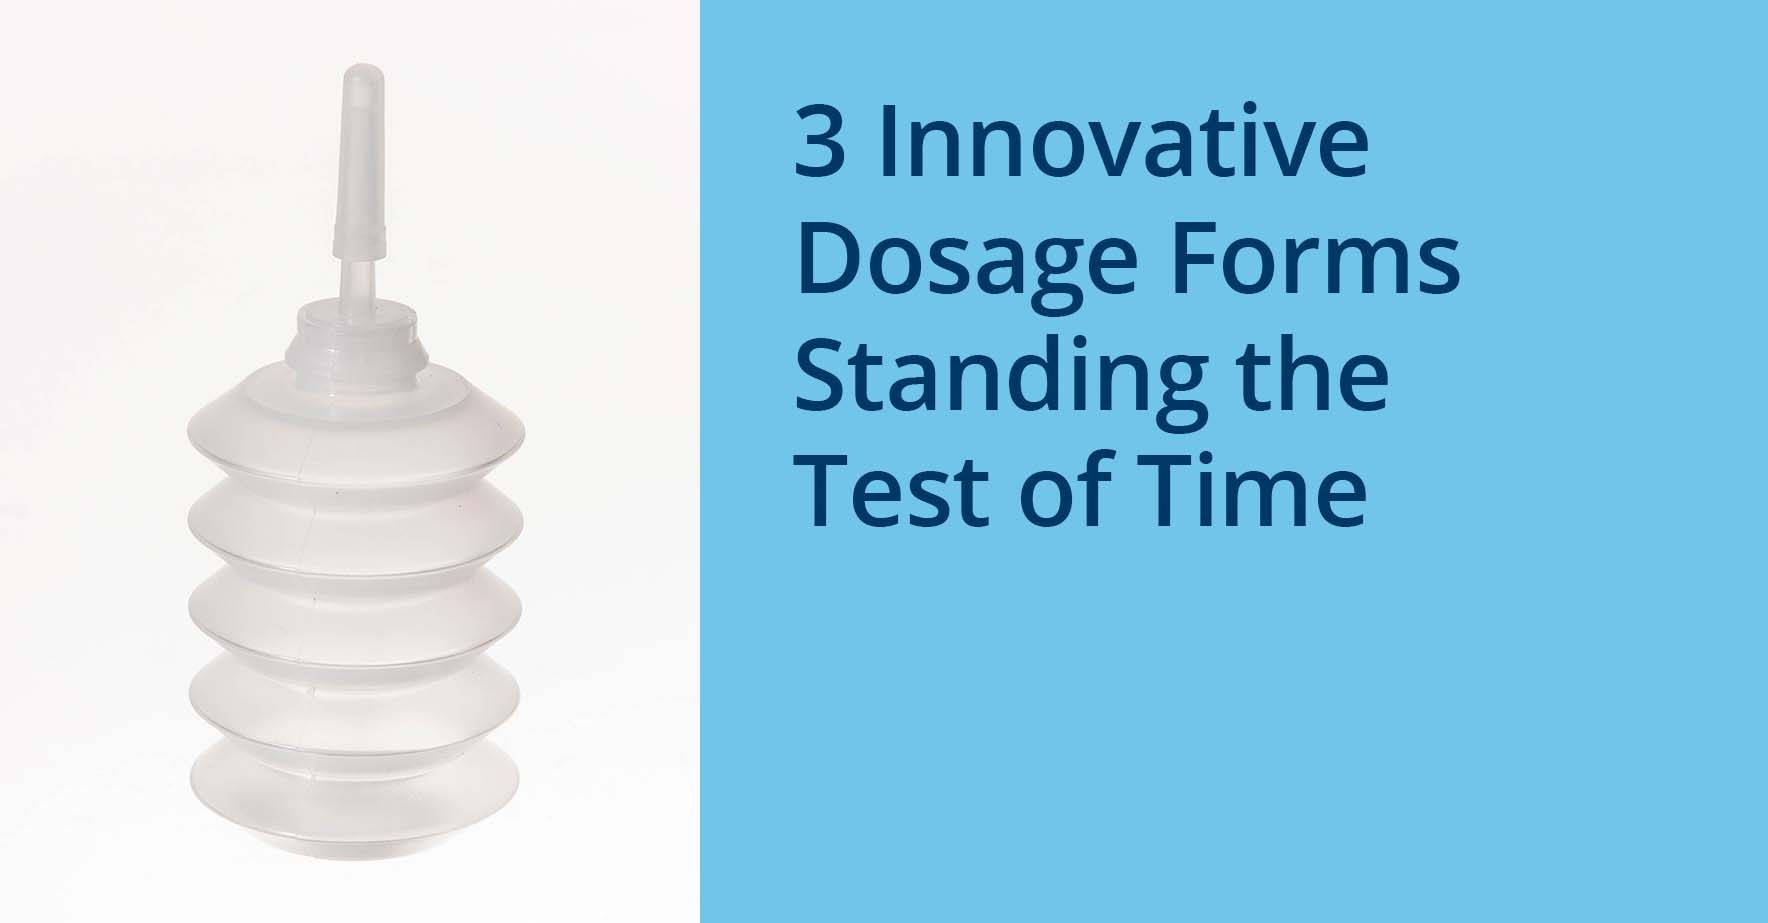 3_innovative_dosage_forms_andate_the_test_of_time.jpg